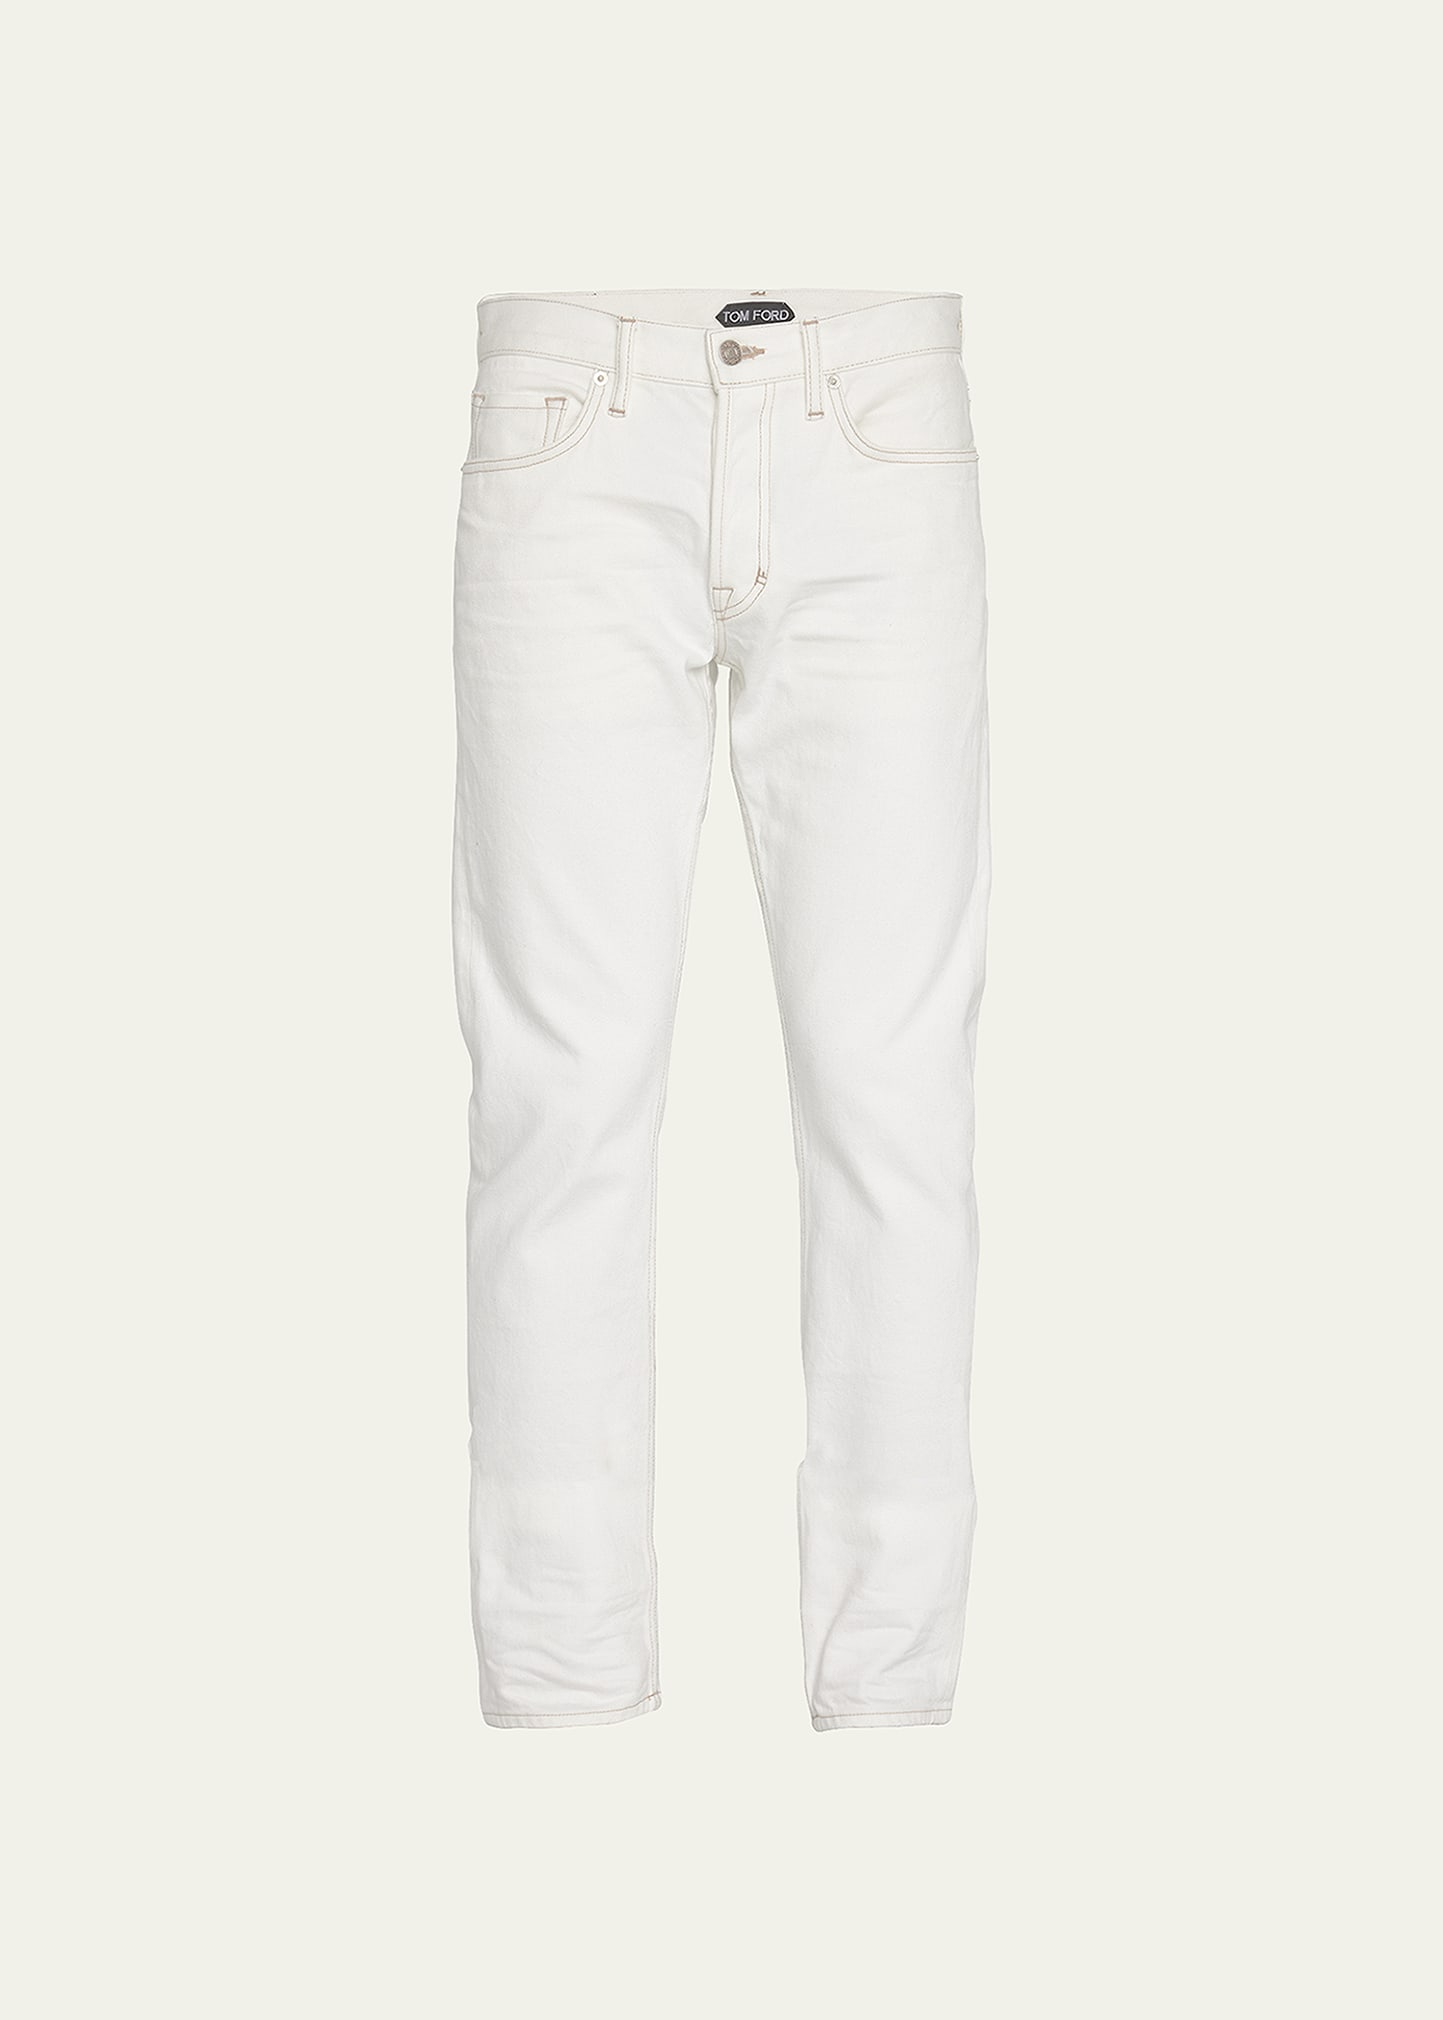 Tom Ford Men's 5-pocket Garment Dyed Jeans In White Solid